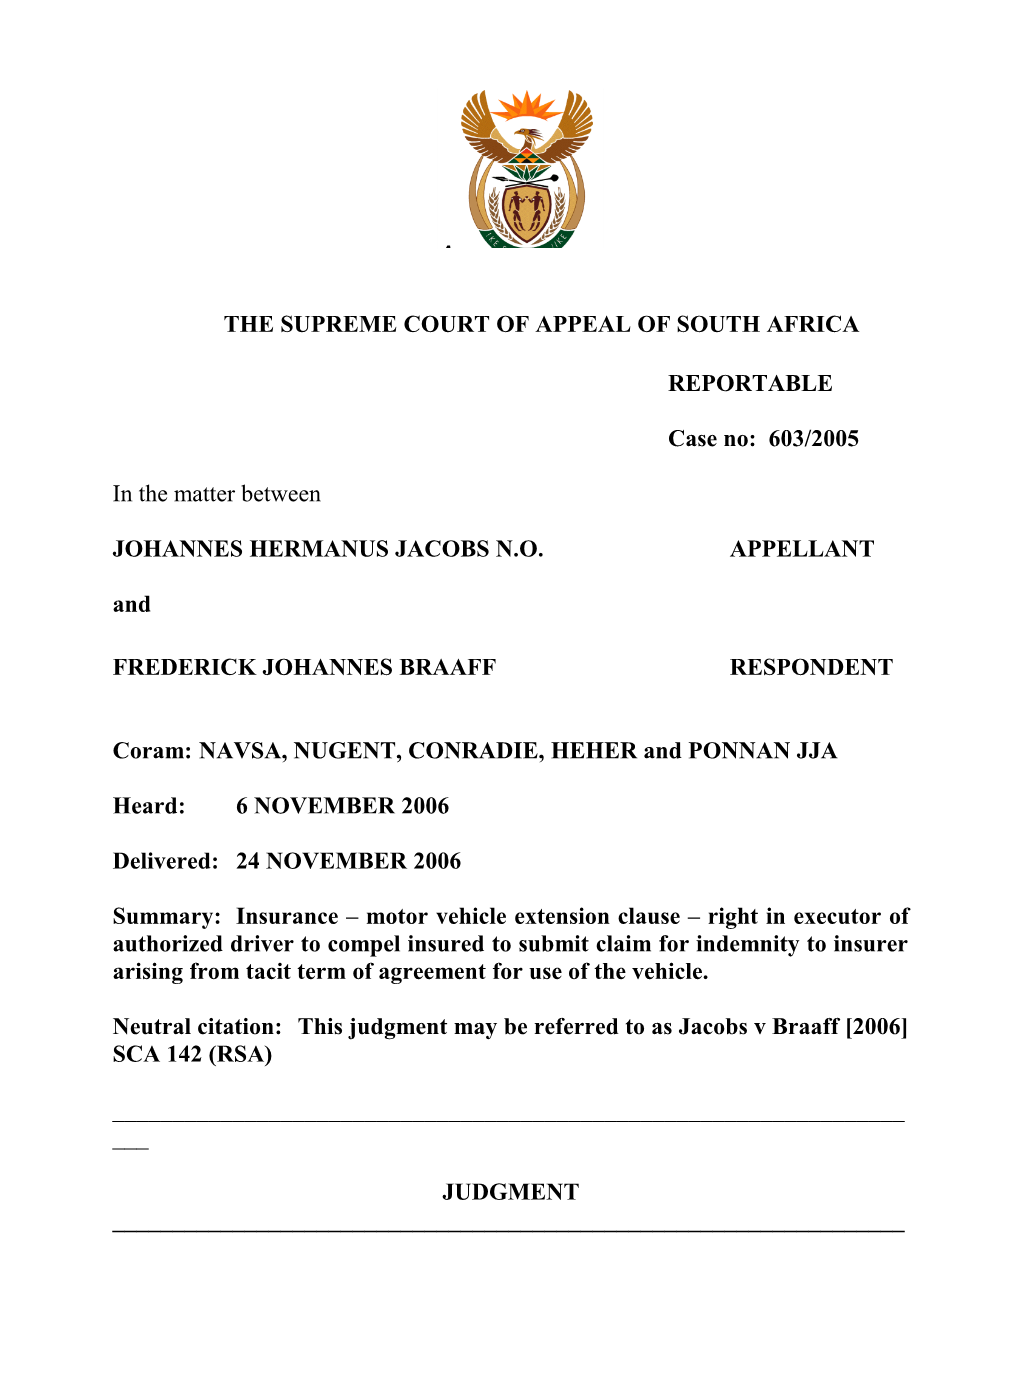 The Supreme Court of Appeal of South Africa s1